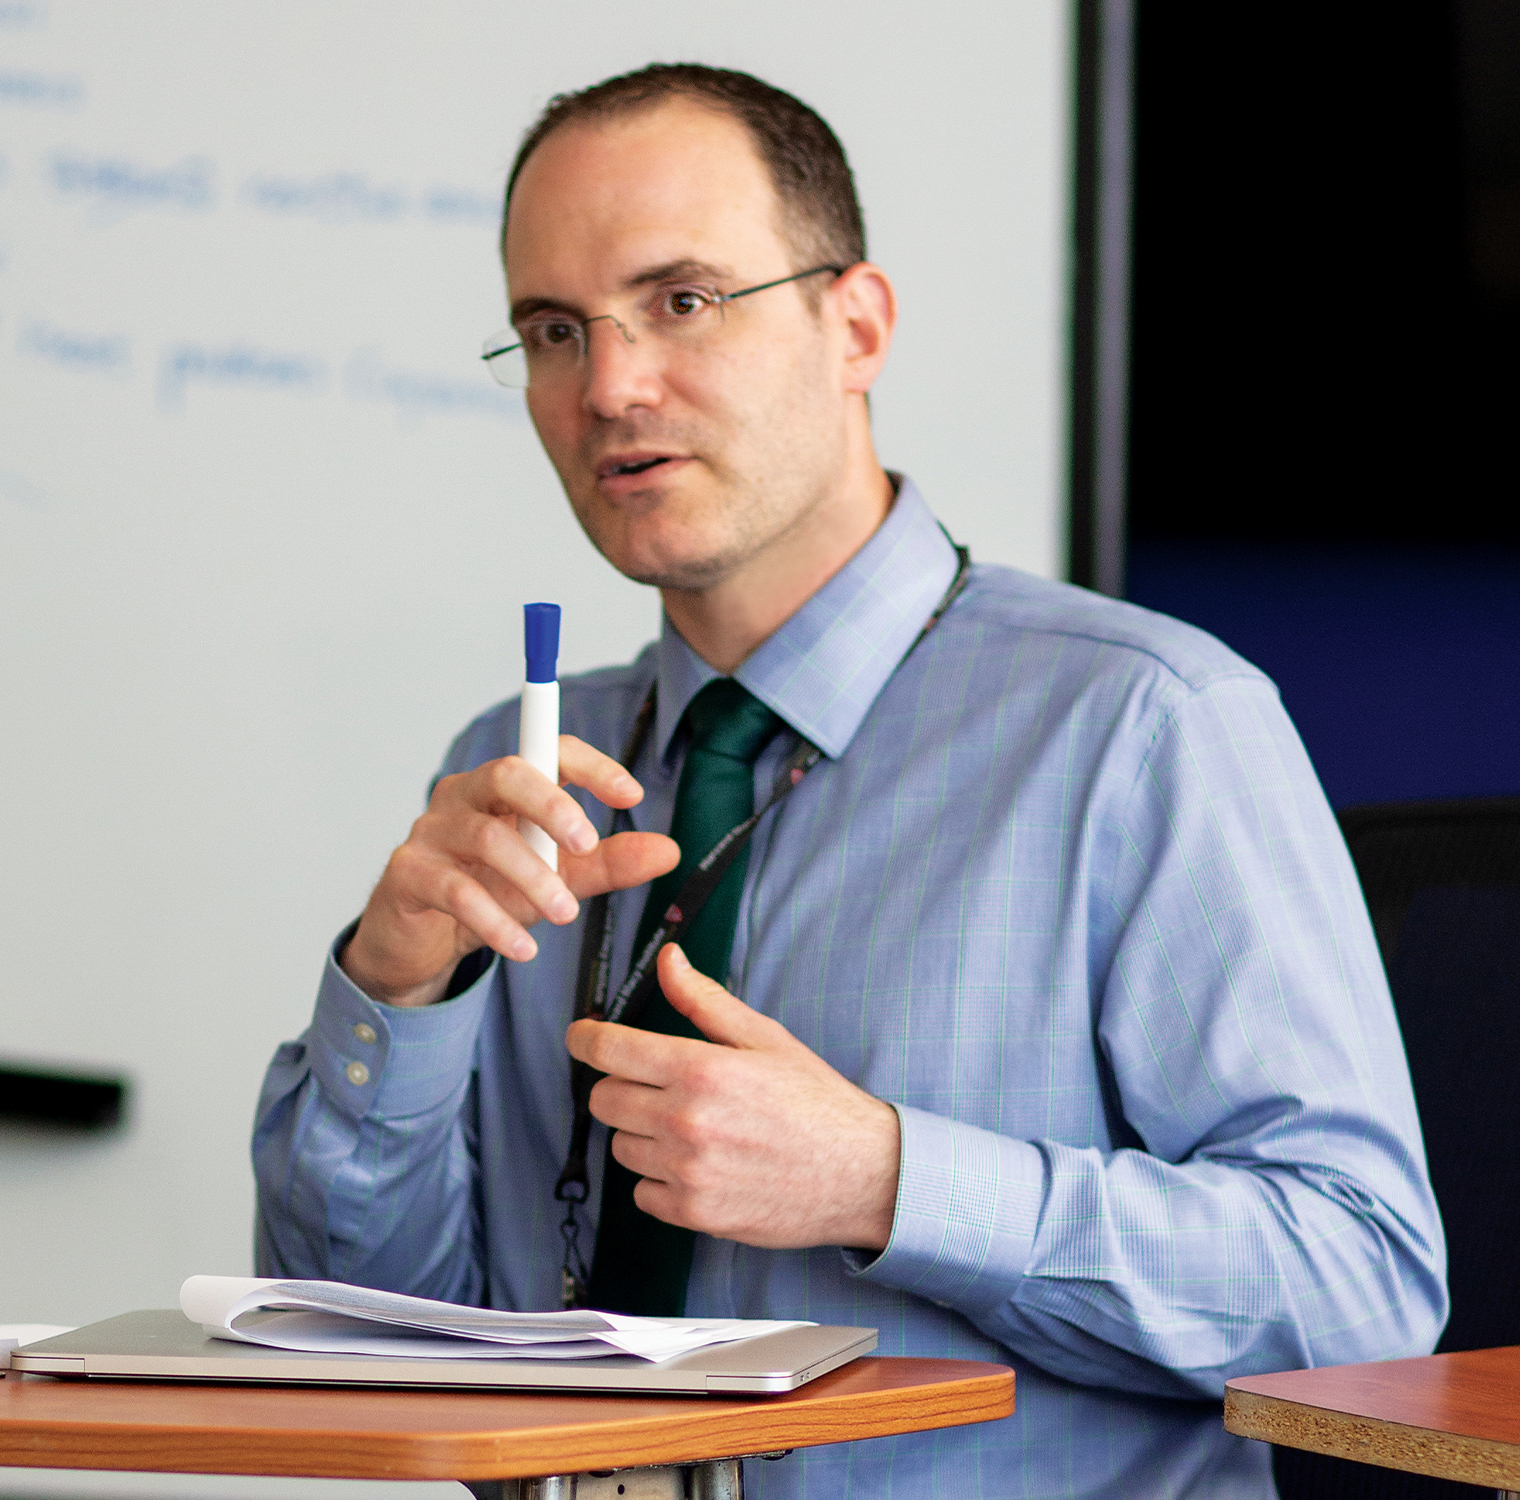 Man in blue shirt gestures with whiteboard marker in hand.